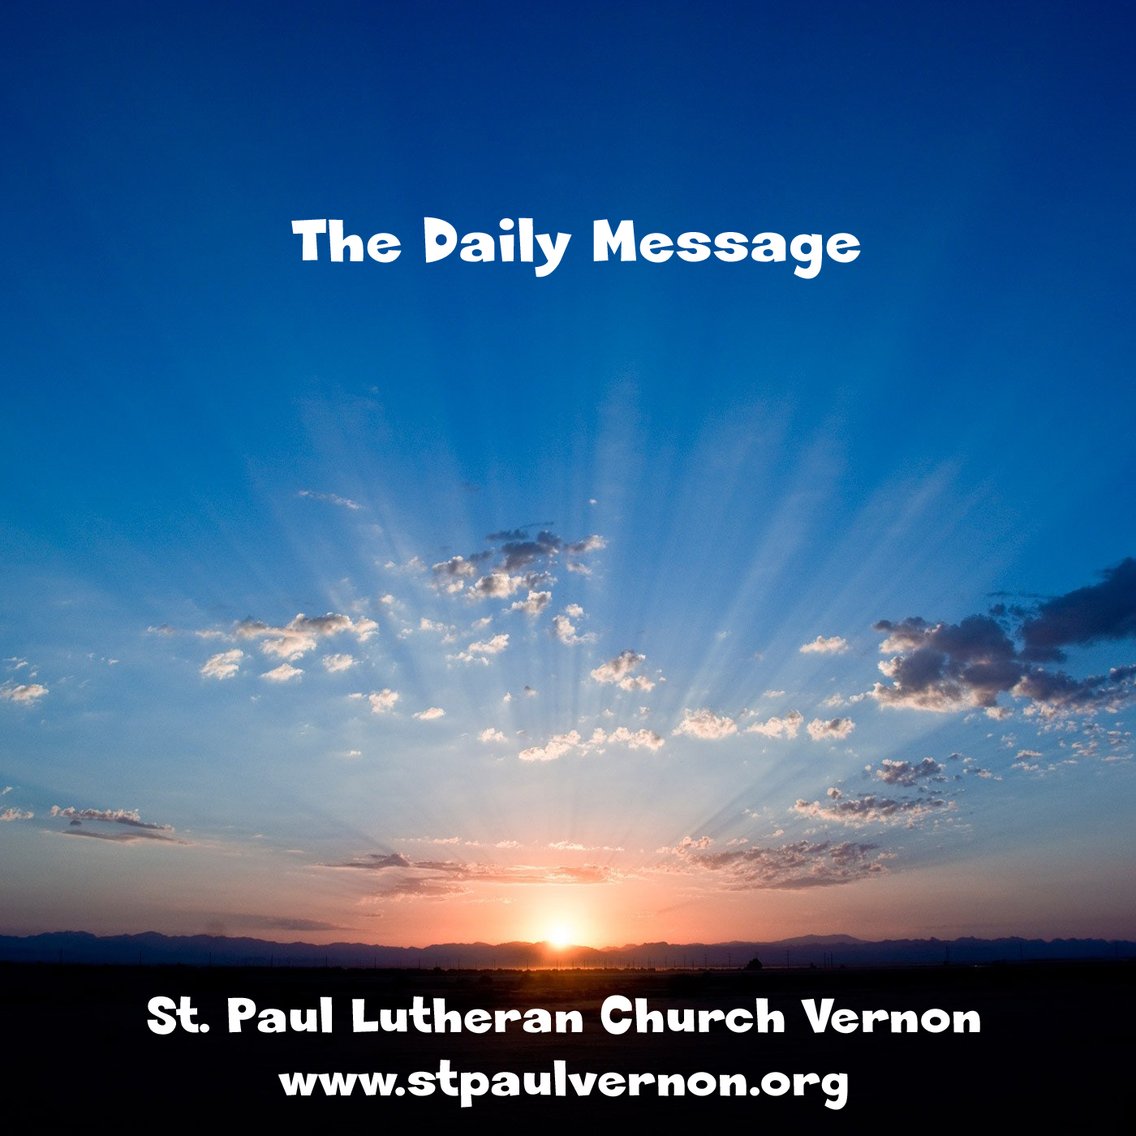 The Daily Message - Cover Image